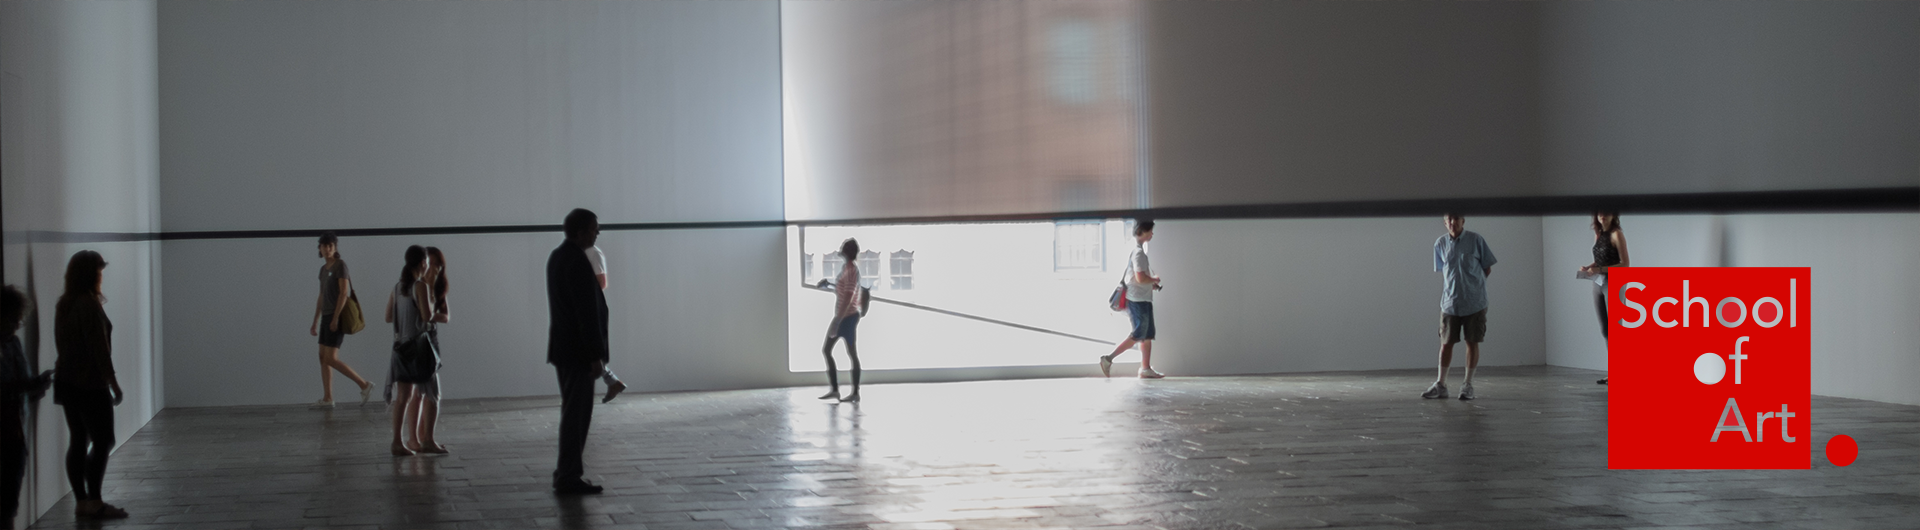 Scrim installation by artist Robert Irwin at the Whitney Museum of American Art, 2013